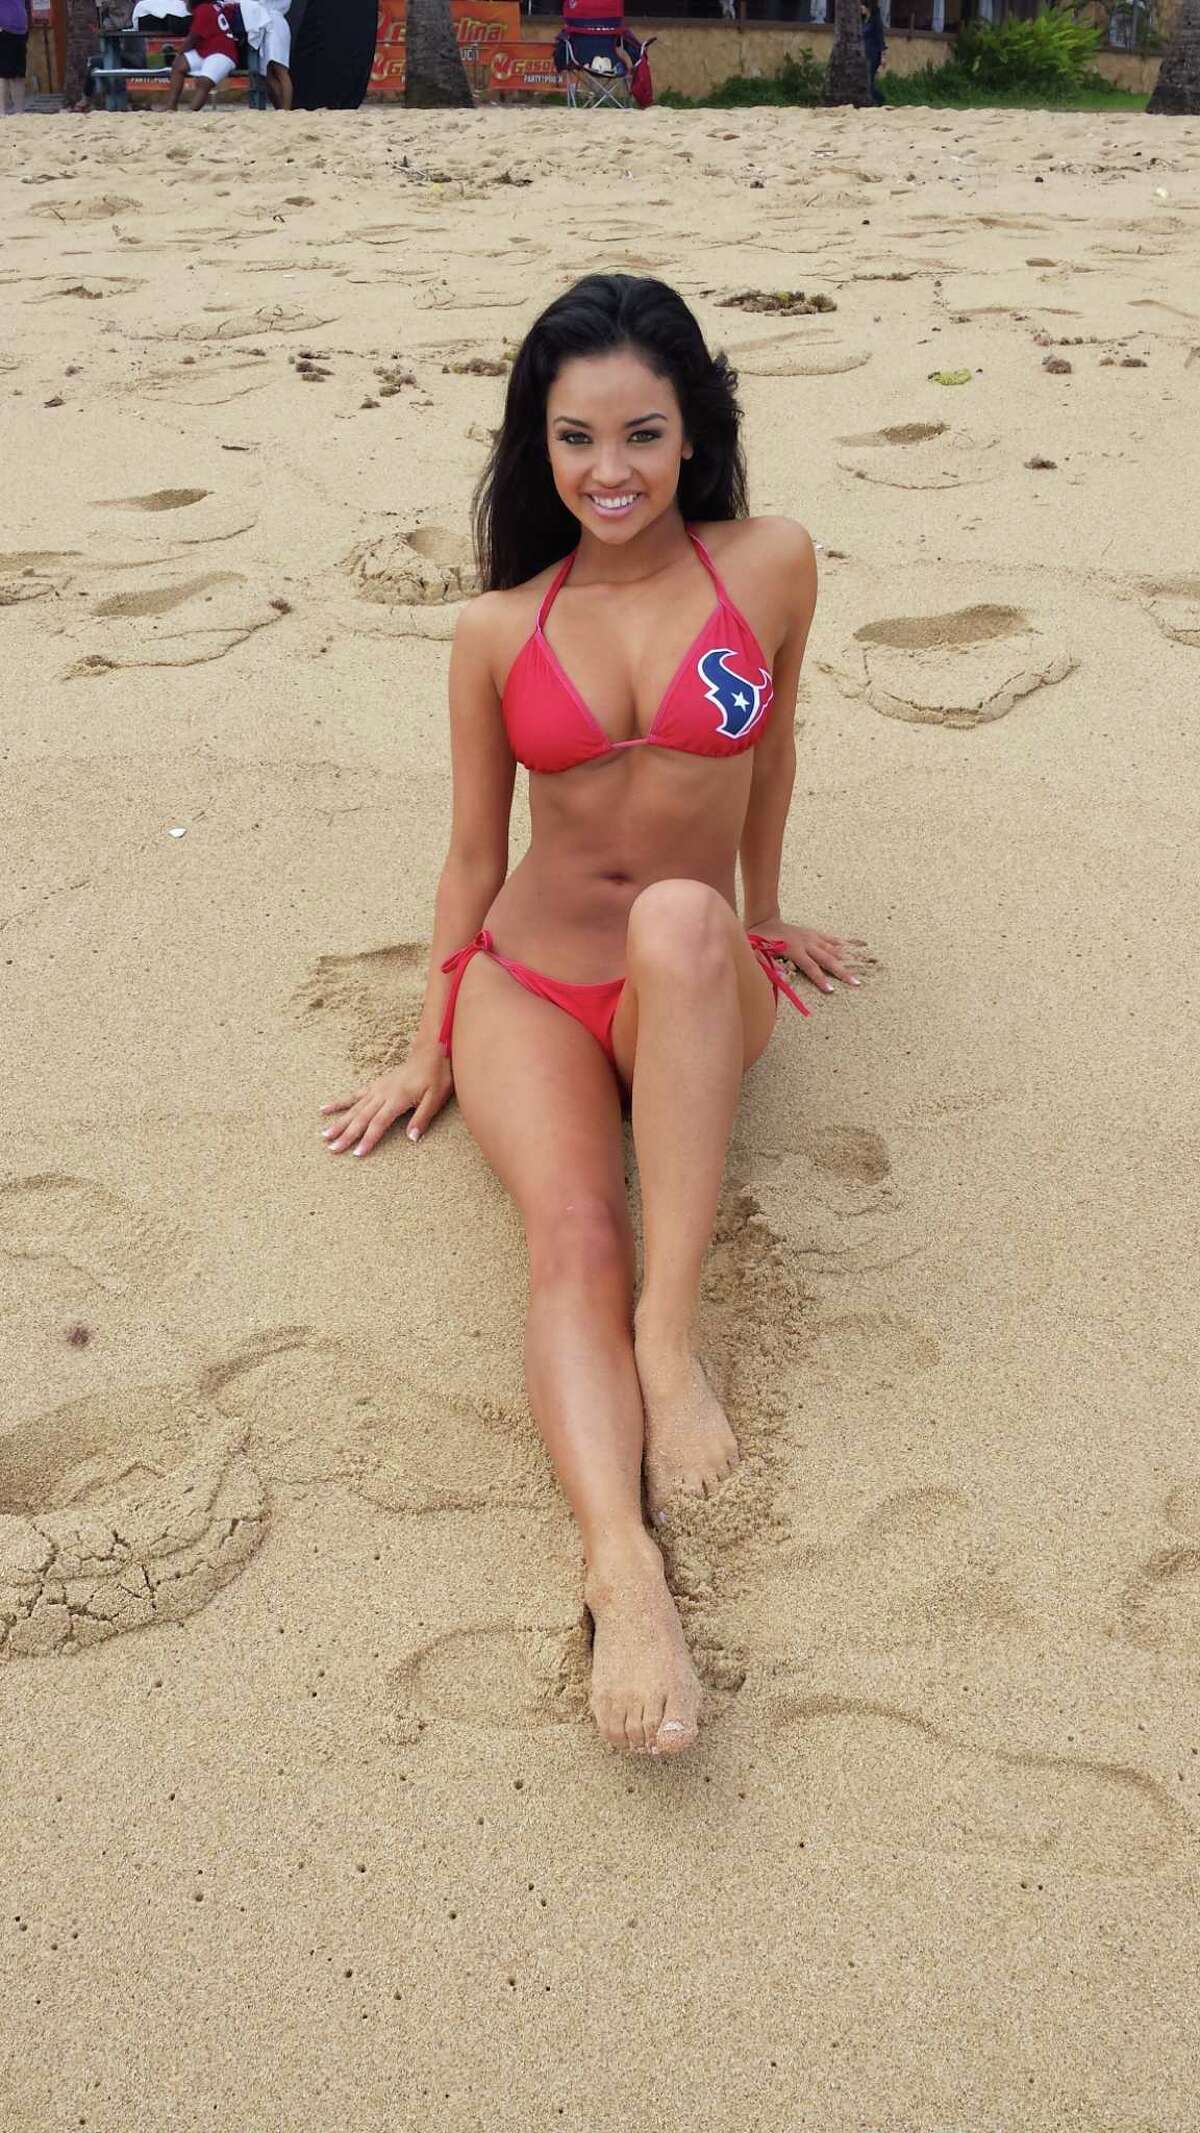 Last year's swimsuit calendar was shot in glamorous Galveston, this year the Texans' ladies made it further afield to Puerto Rico.